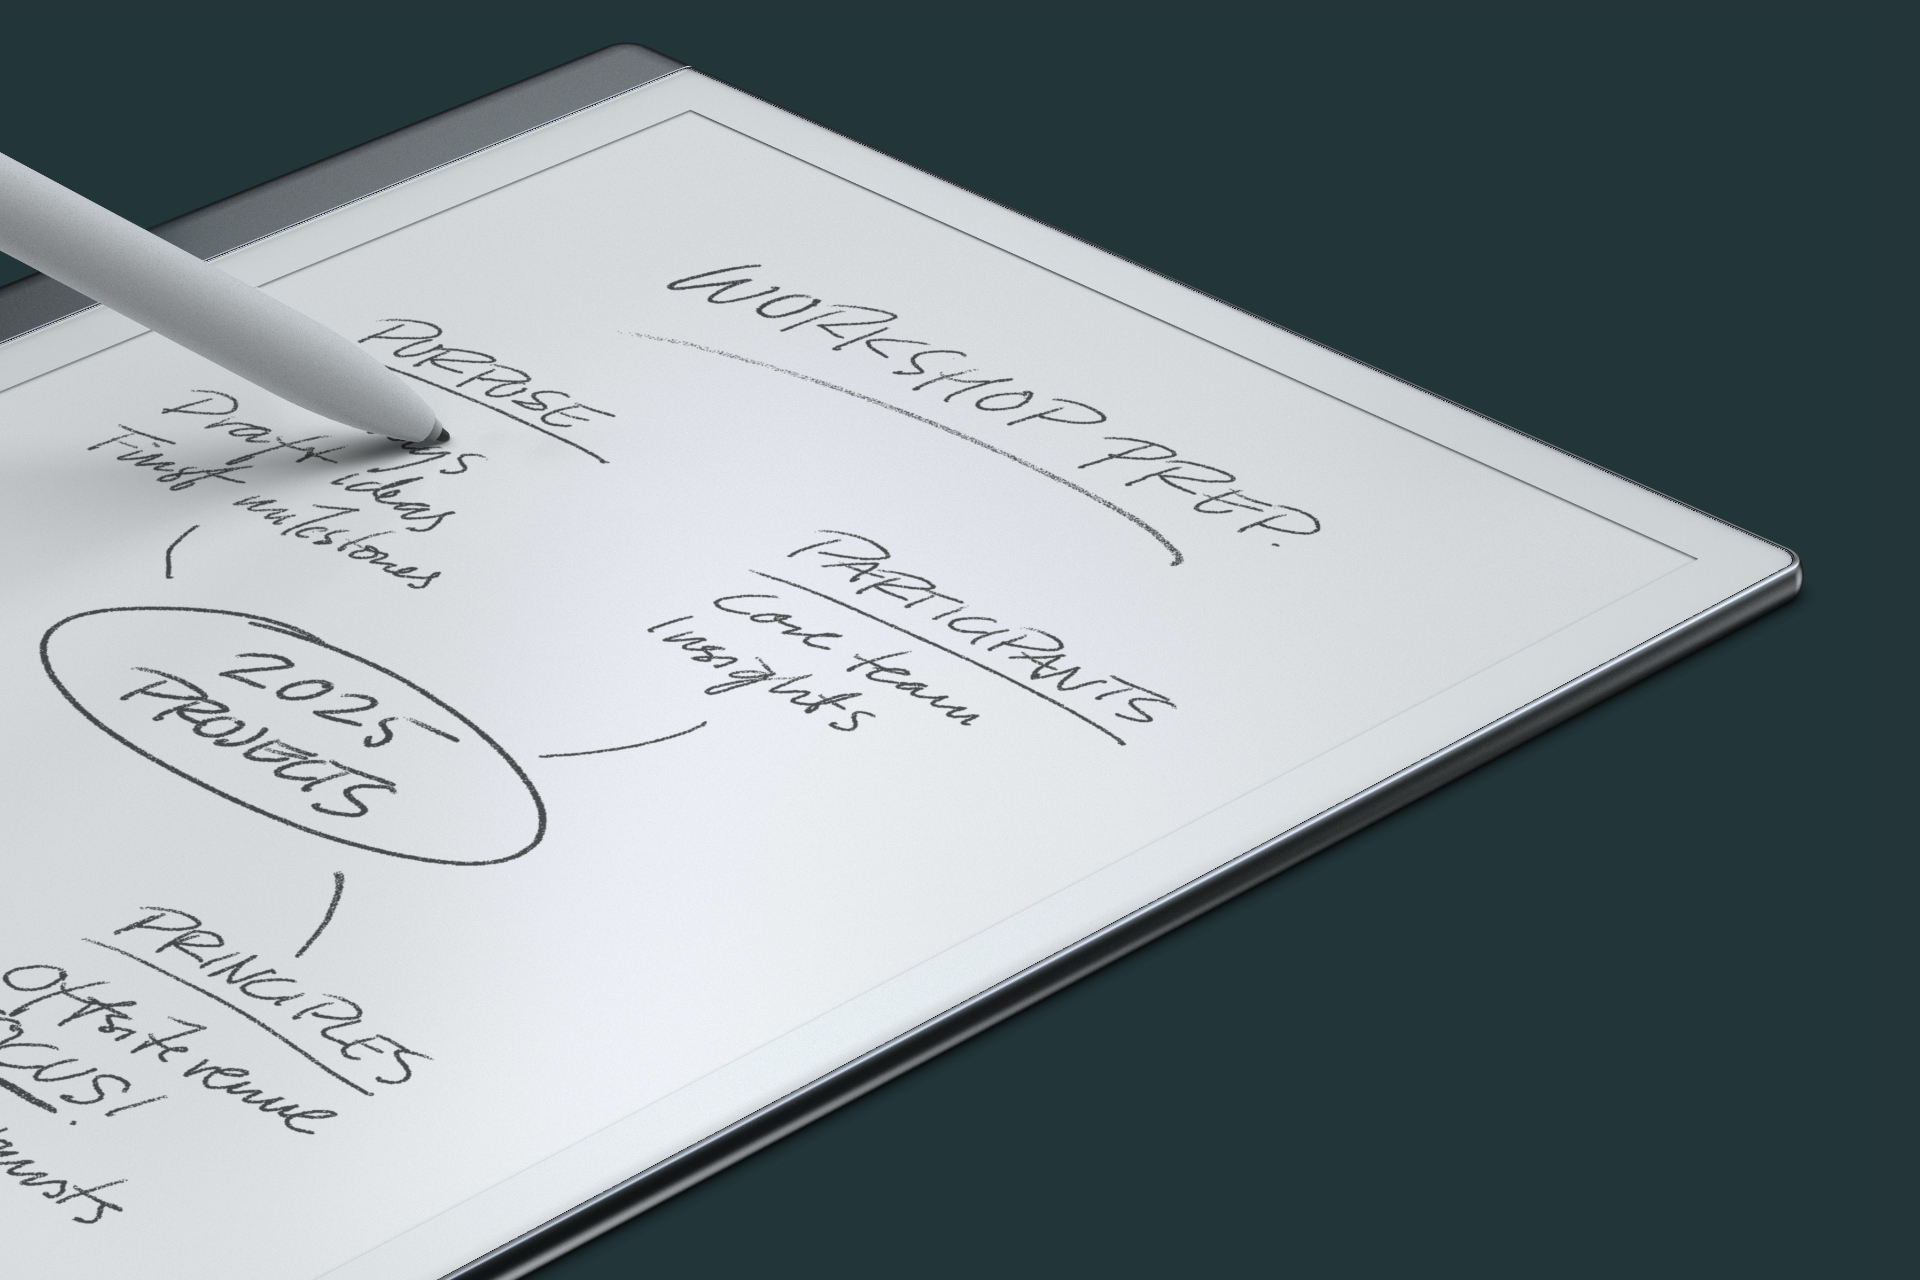 ReMarkable 2 e-ink tablet review